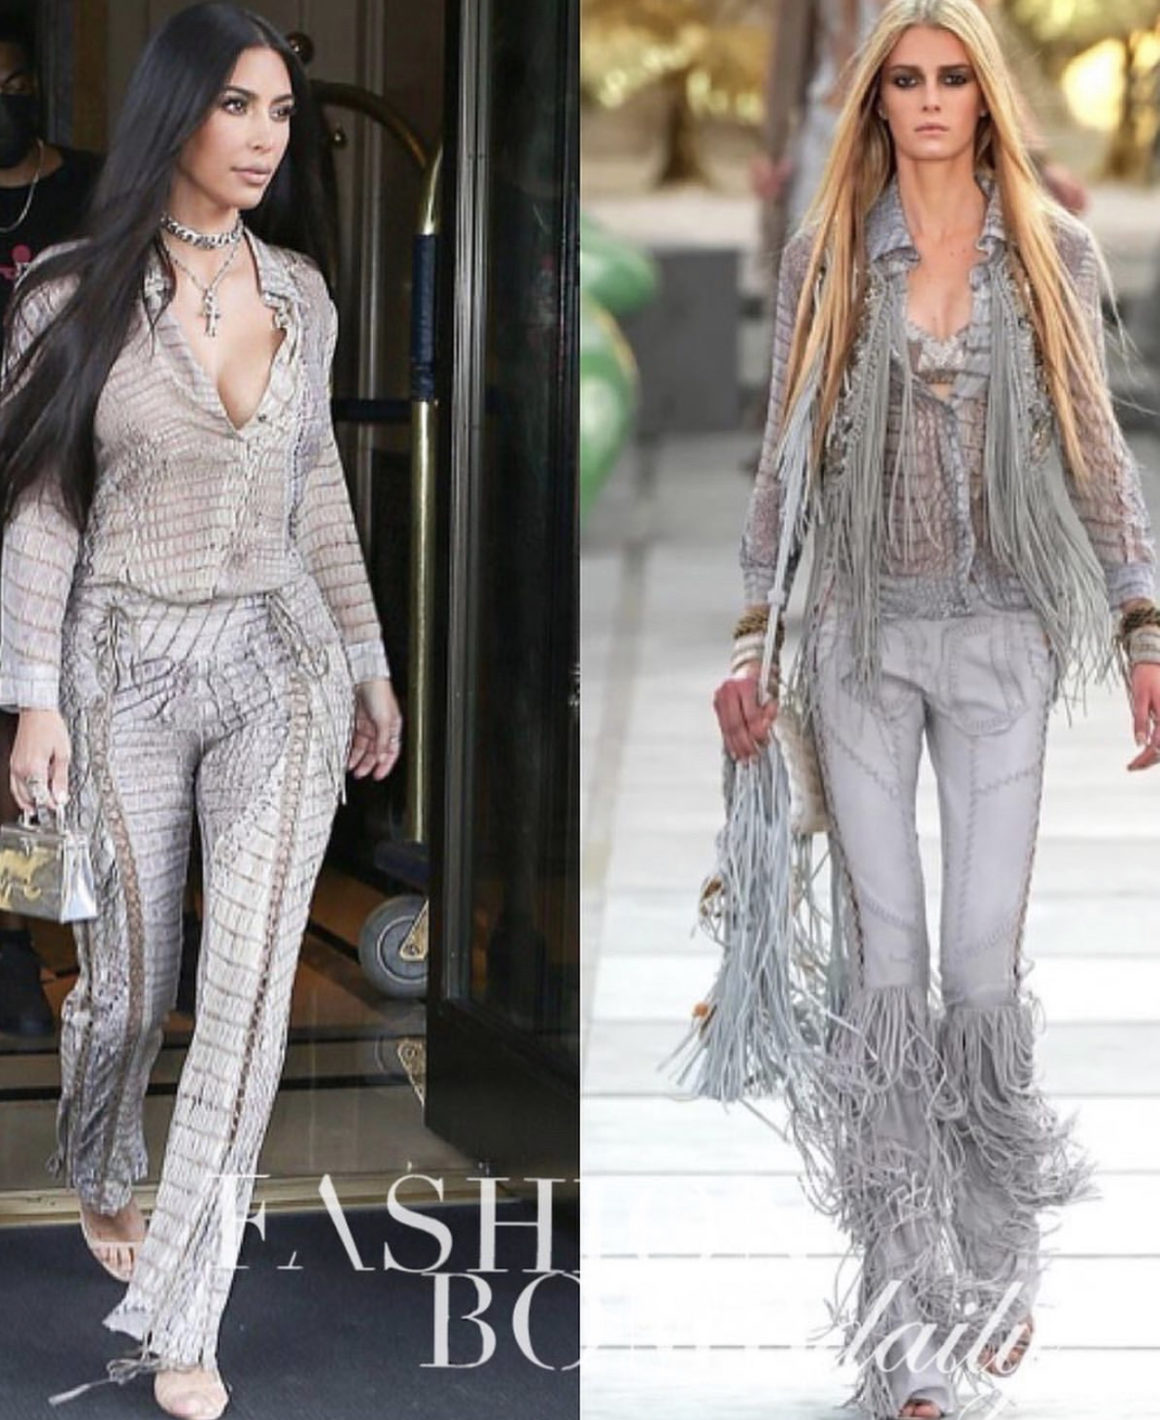 Kim Kardashian Steps out in NYC in Roberto Cavalli Spring 2011 Snake Print  Pants and Top, The Fashion Bomb Blog